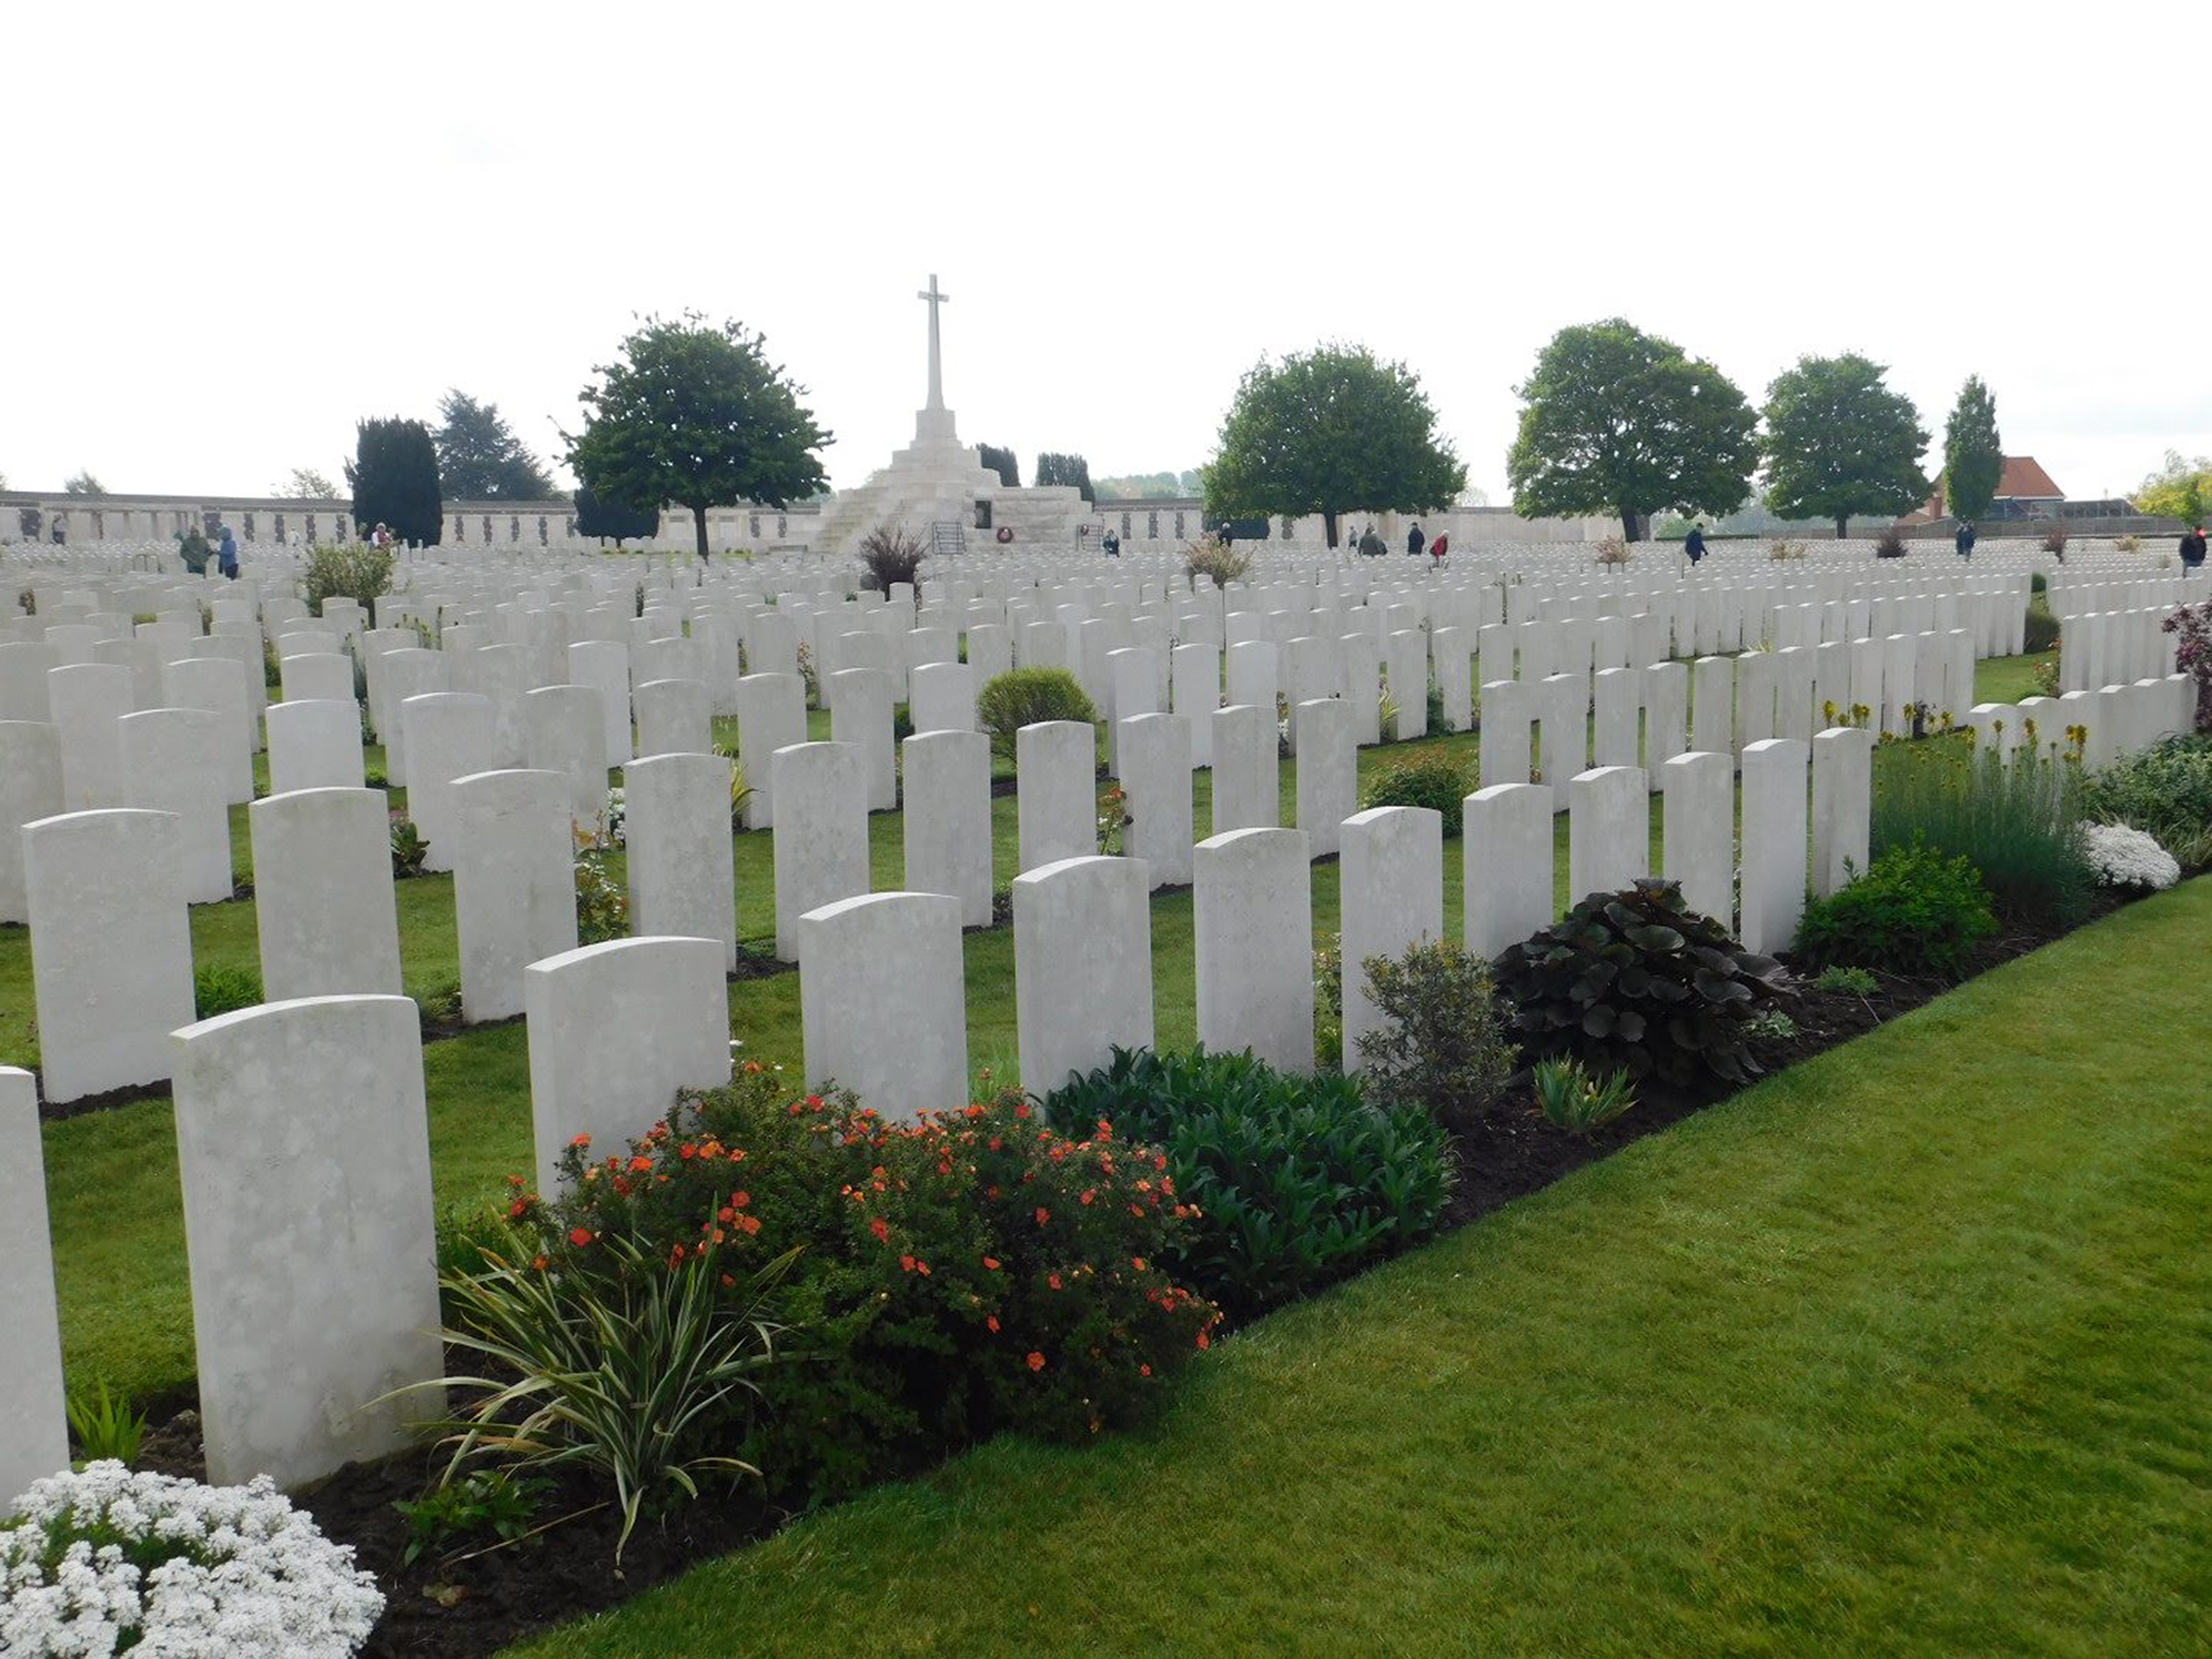 Tyne Cot Commonwealth War Graves Cemetery and Memorial to the Missing